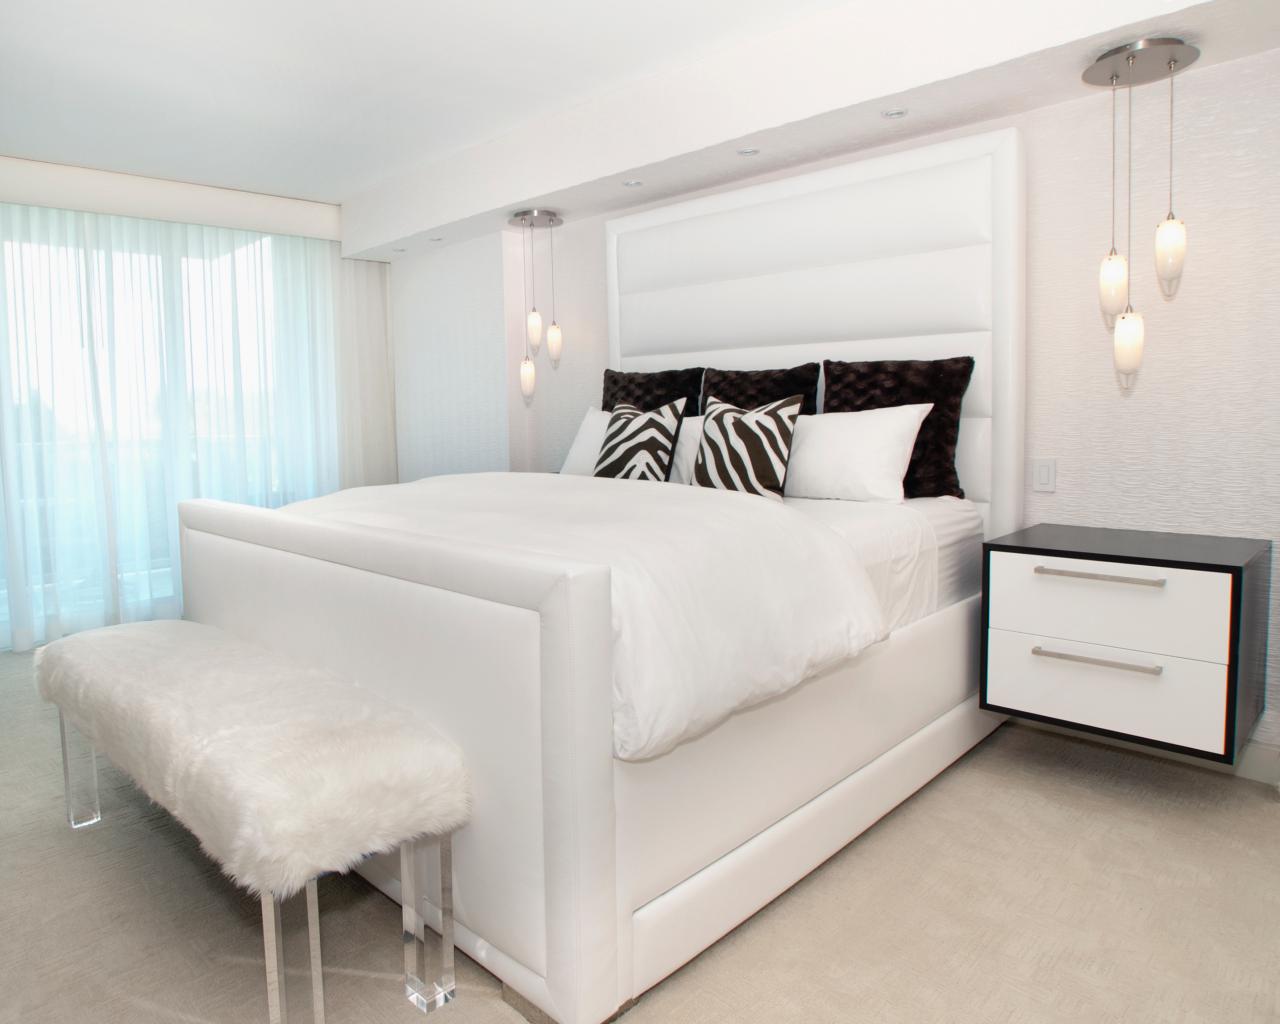 White Modern Bedroom Furniture: A Timeless Statement Of Style